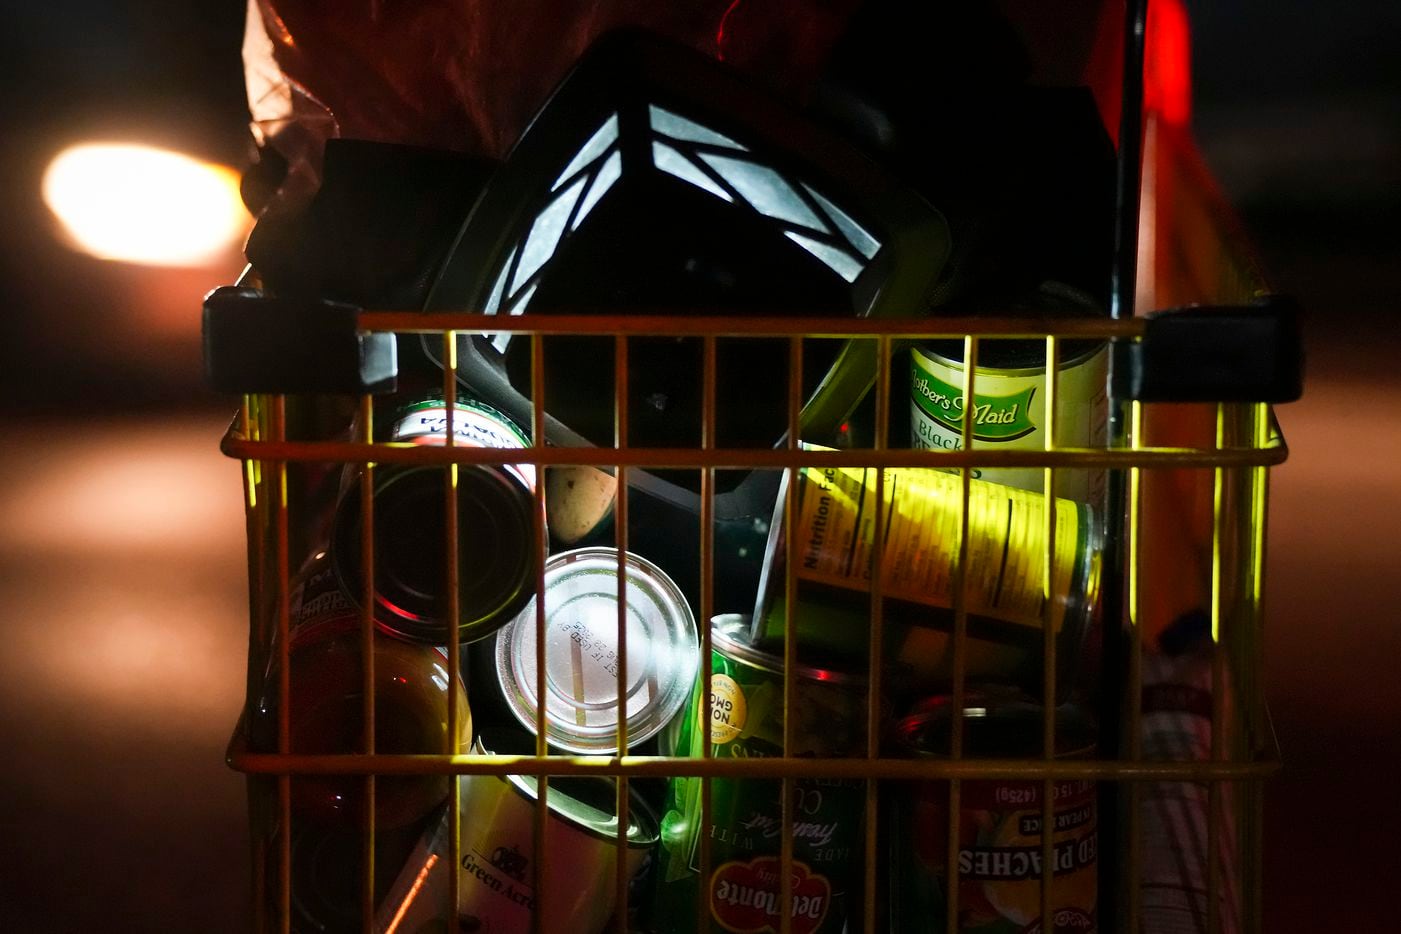 A woman experiencing homelessness pushes a cart filled with canned food in the 5400 block of...